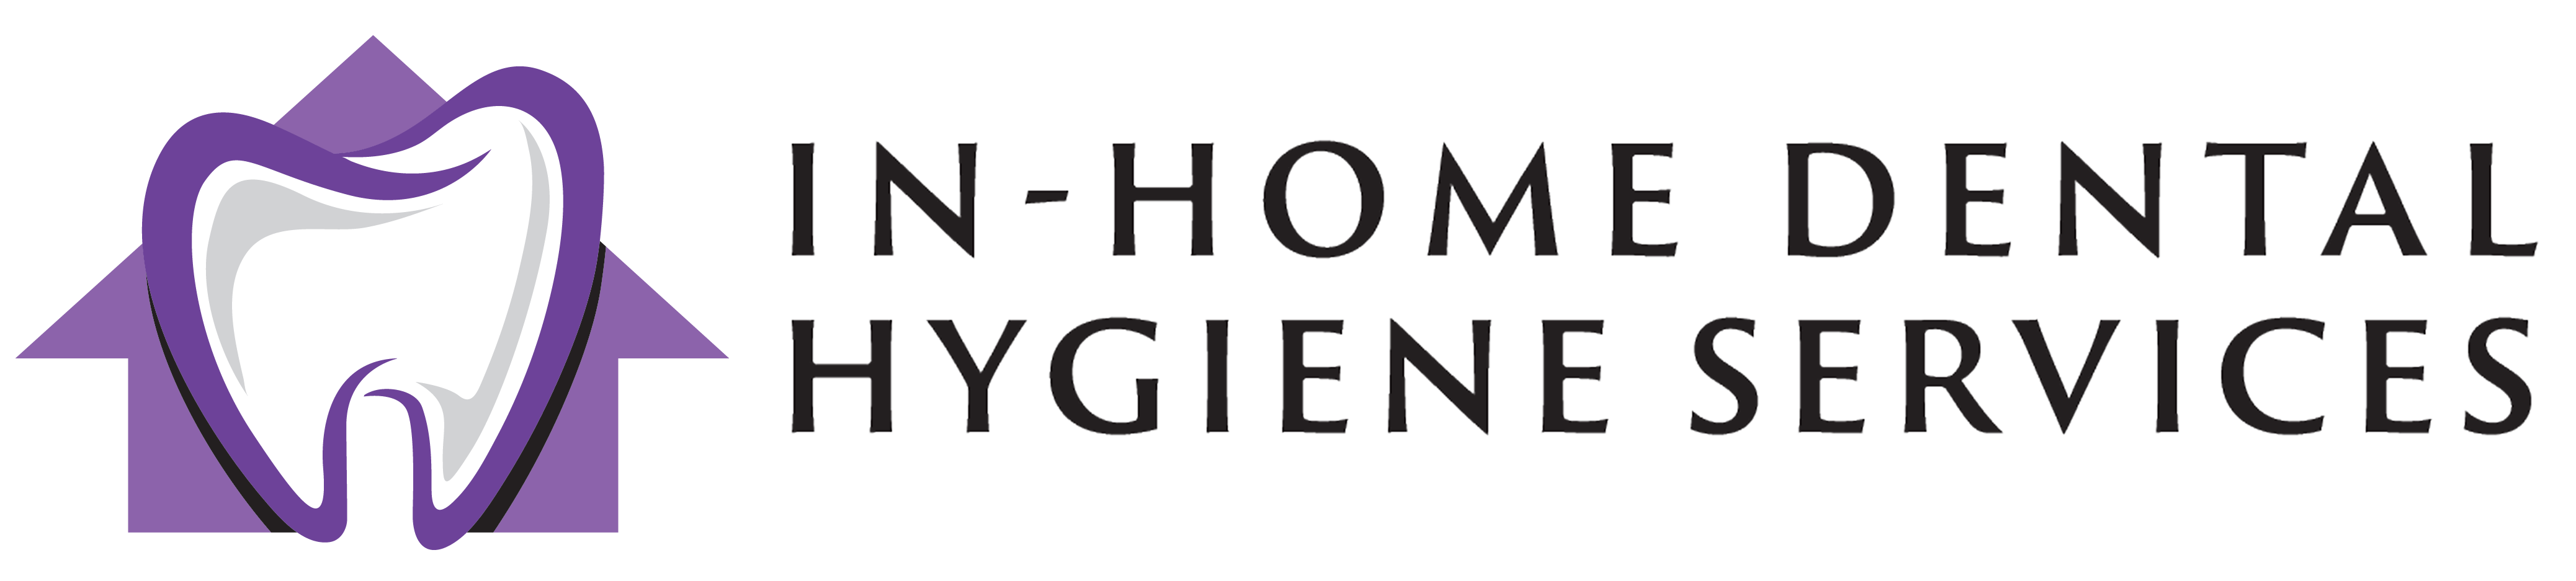 In-Home Dental Hygiene Services